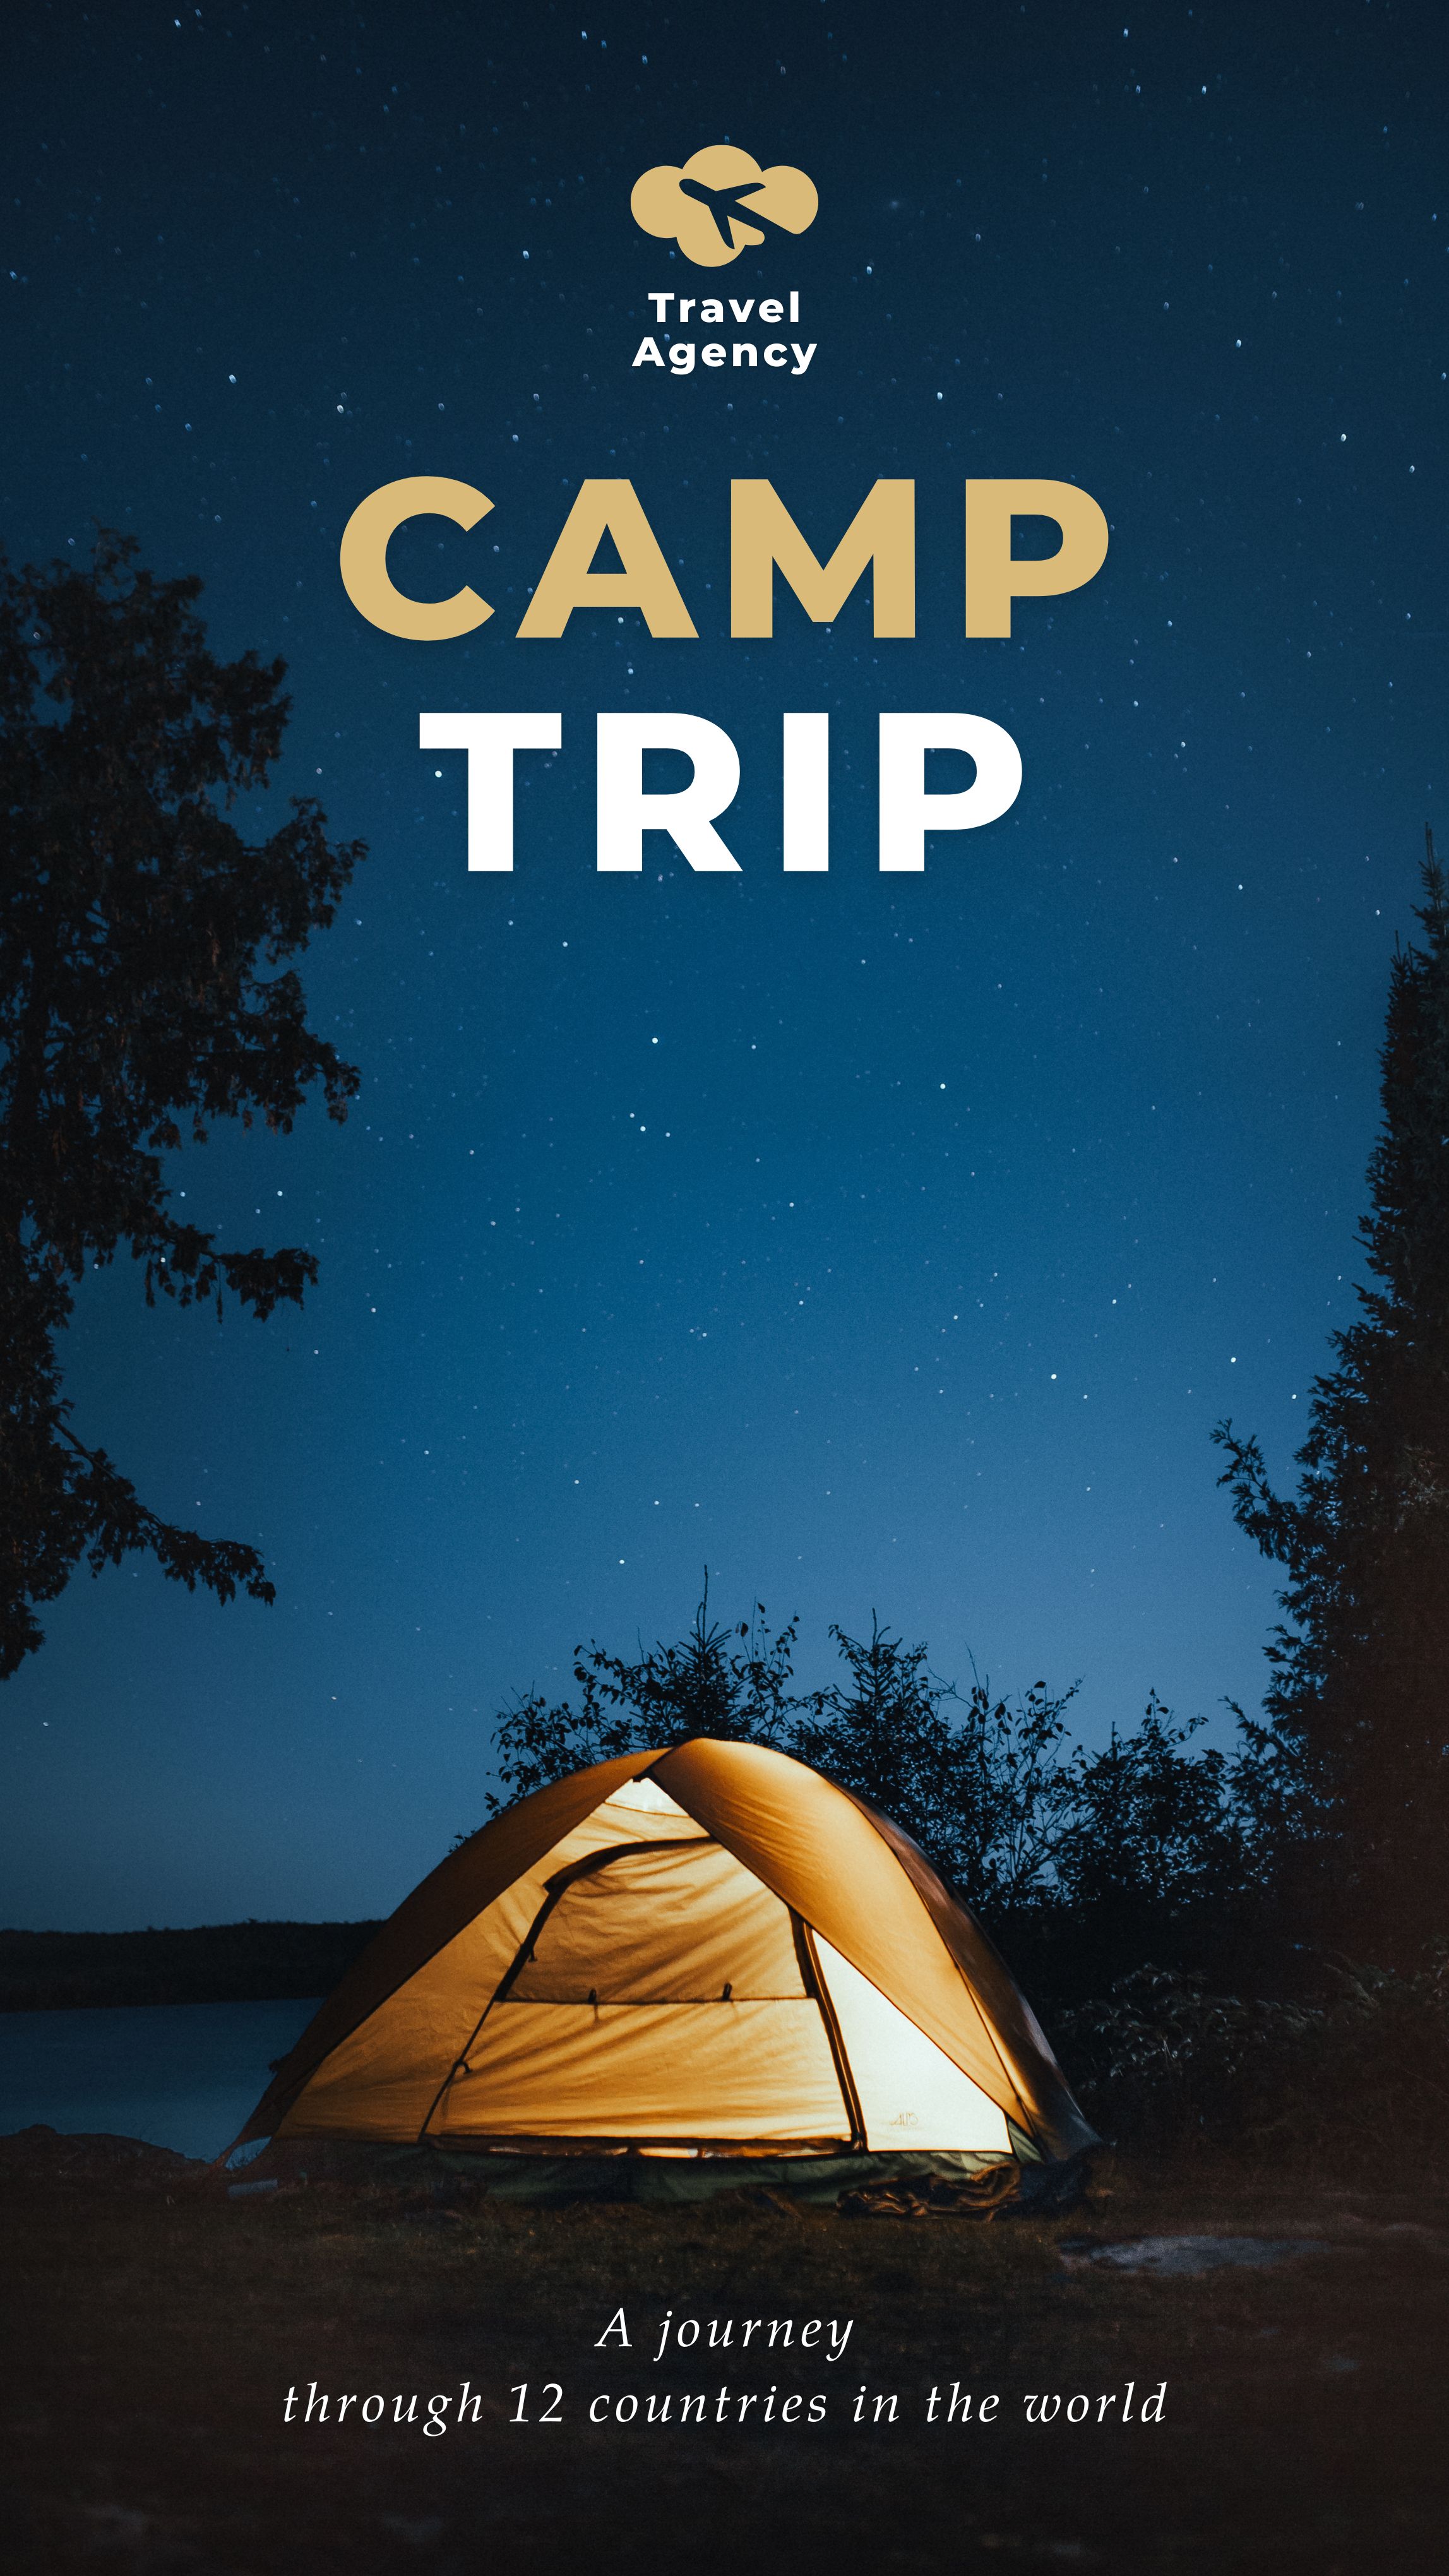 Template Story Instagram Camp Trip